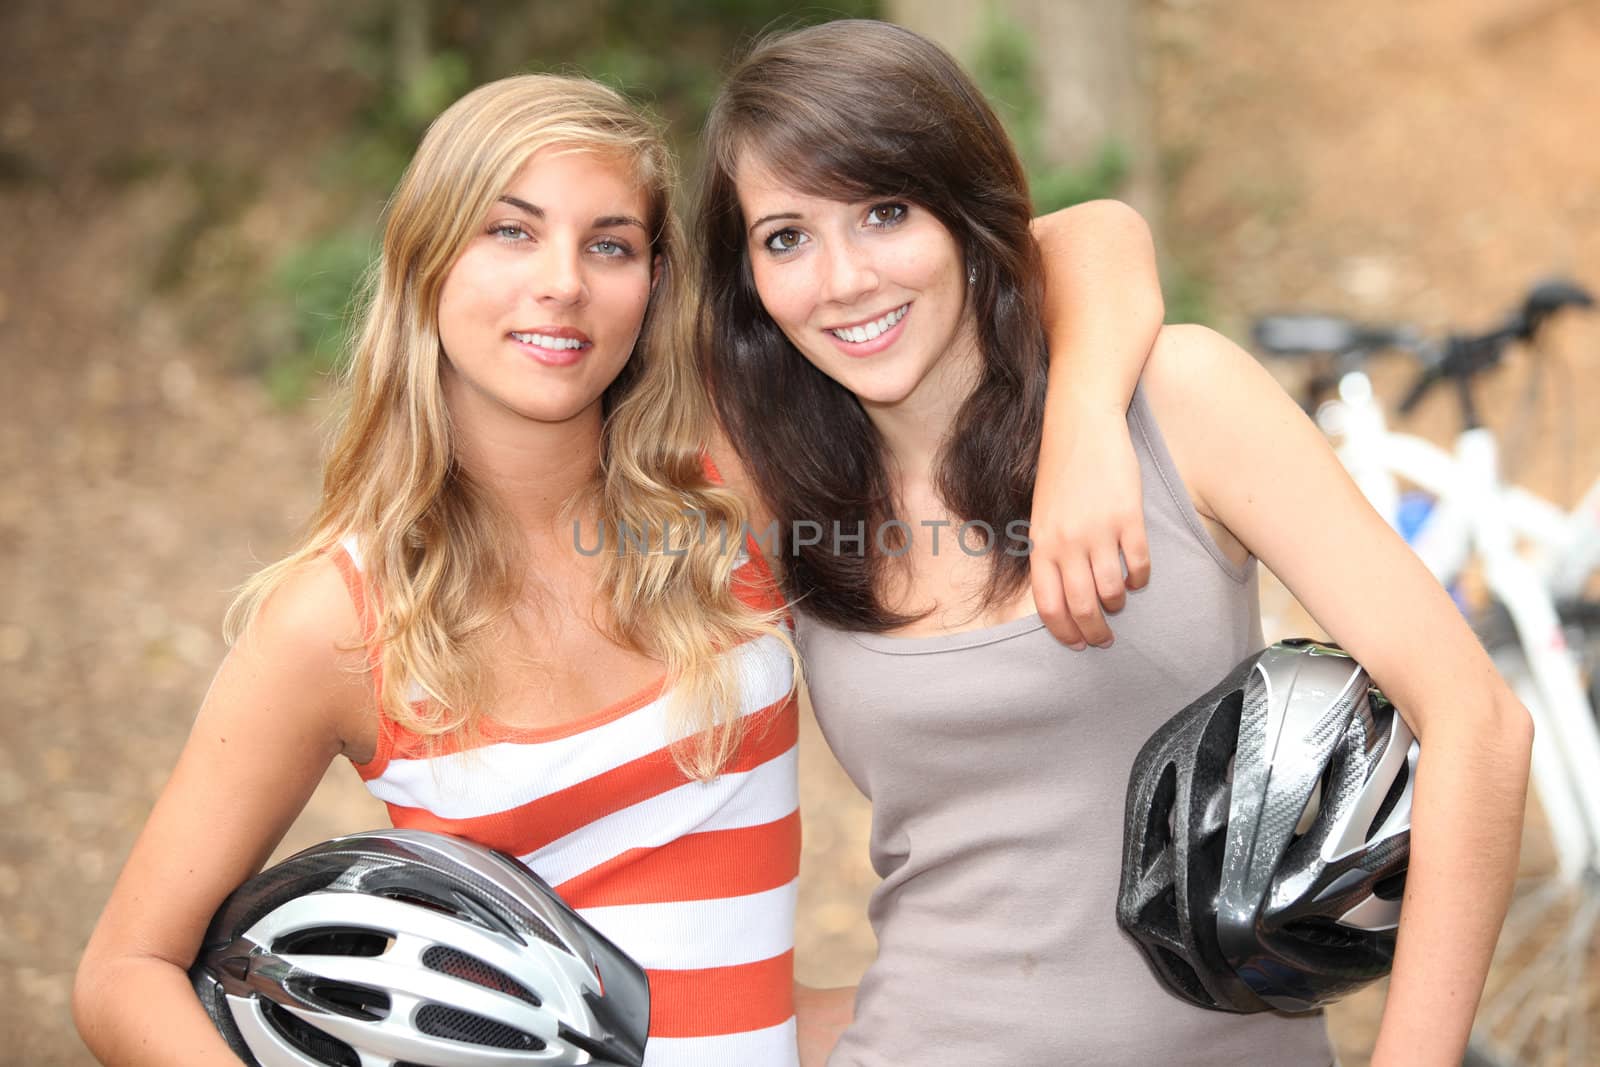 Young female cyclists